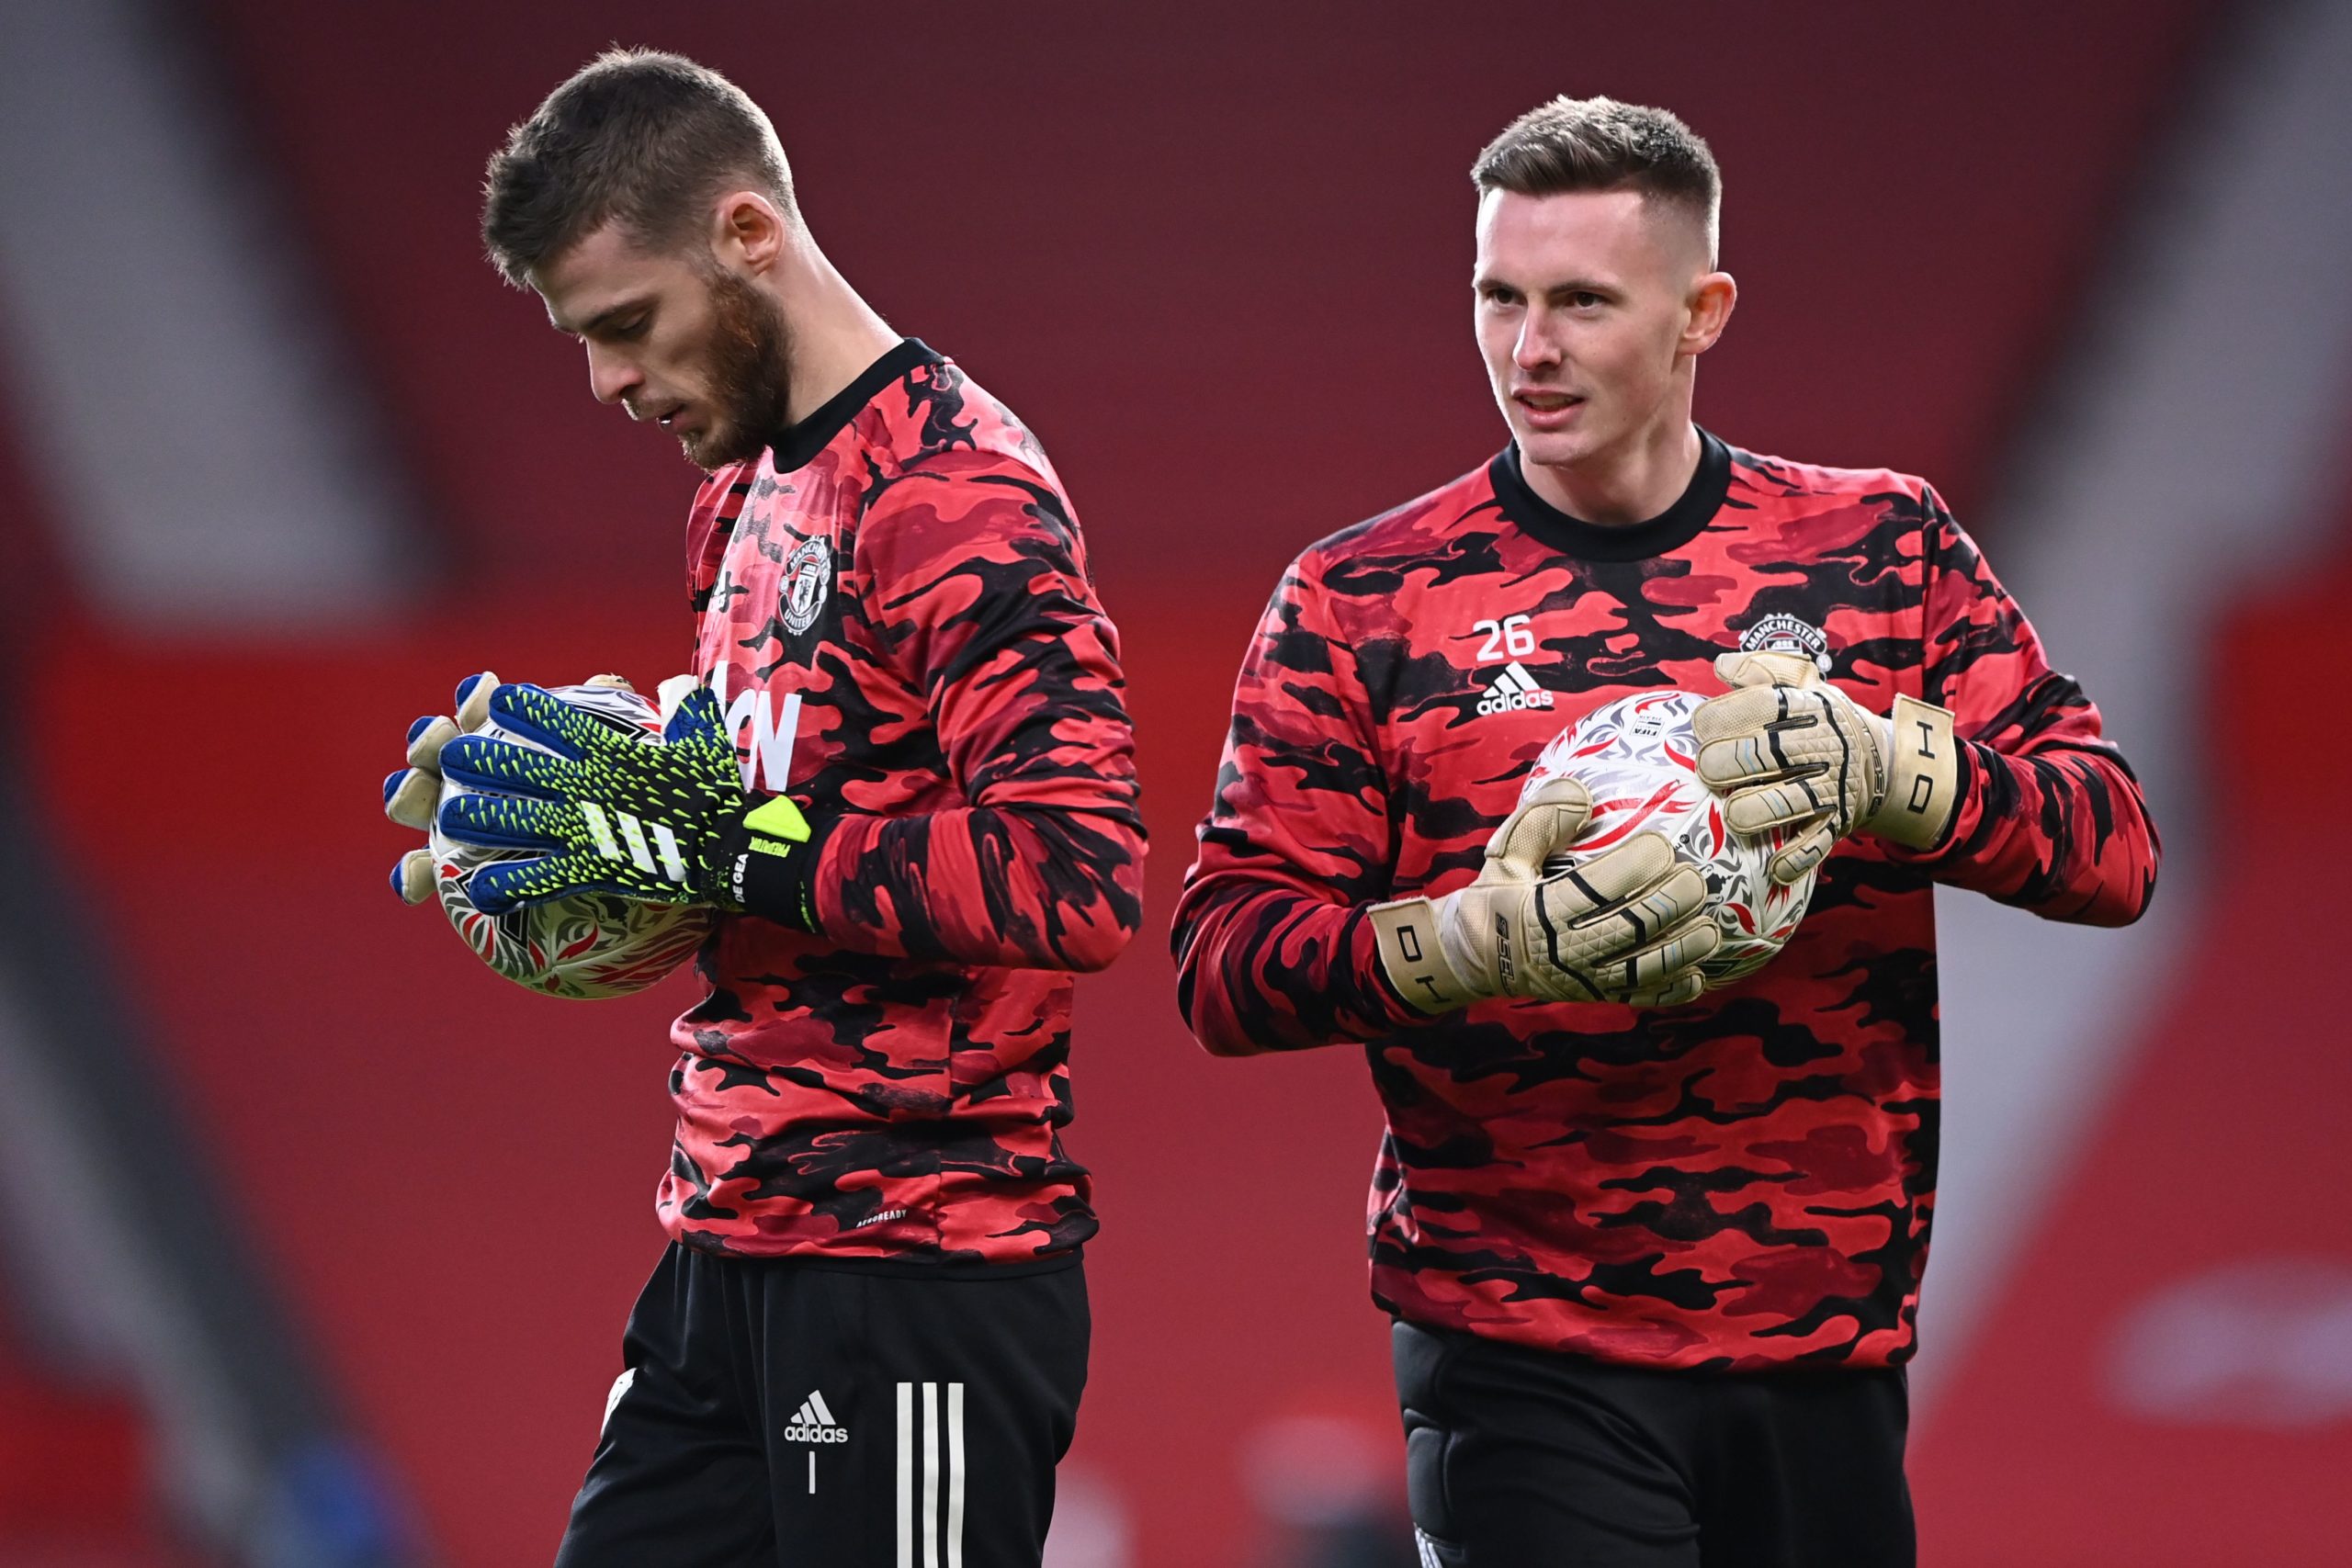 Dean Henderson Gives Ultimatum Amid Lack Of Opportunities (David de Gea and Dean Henderson can be seen in the picture)